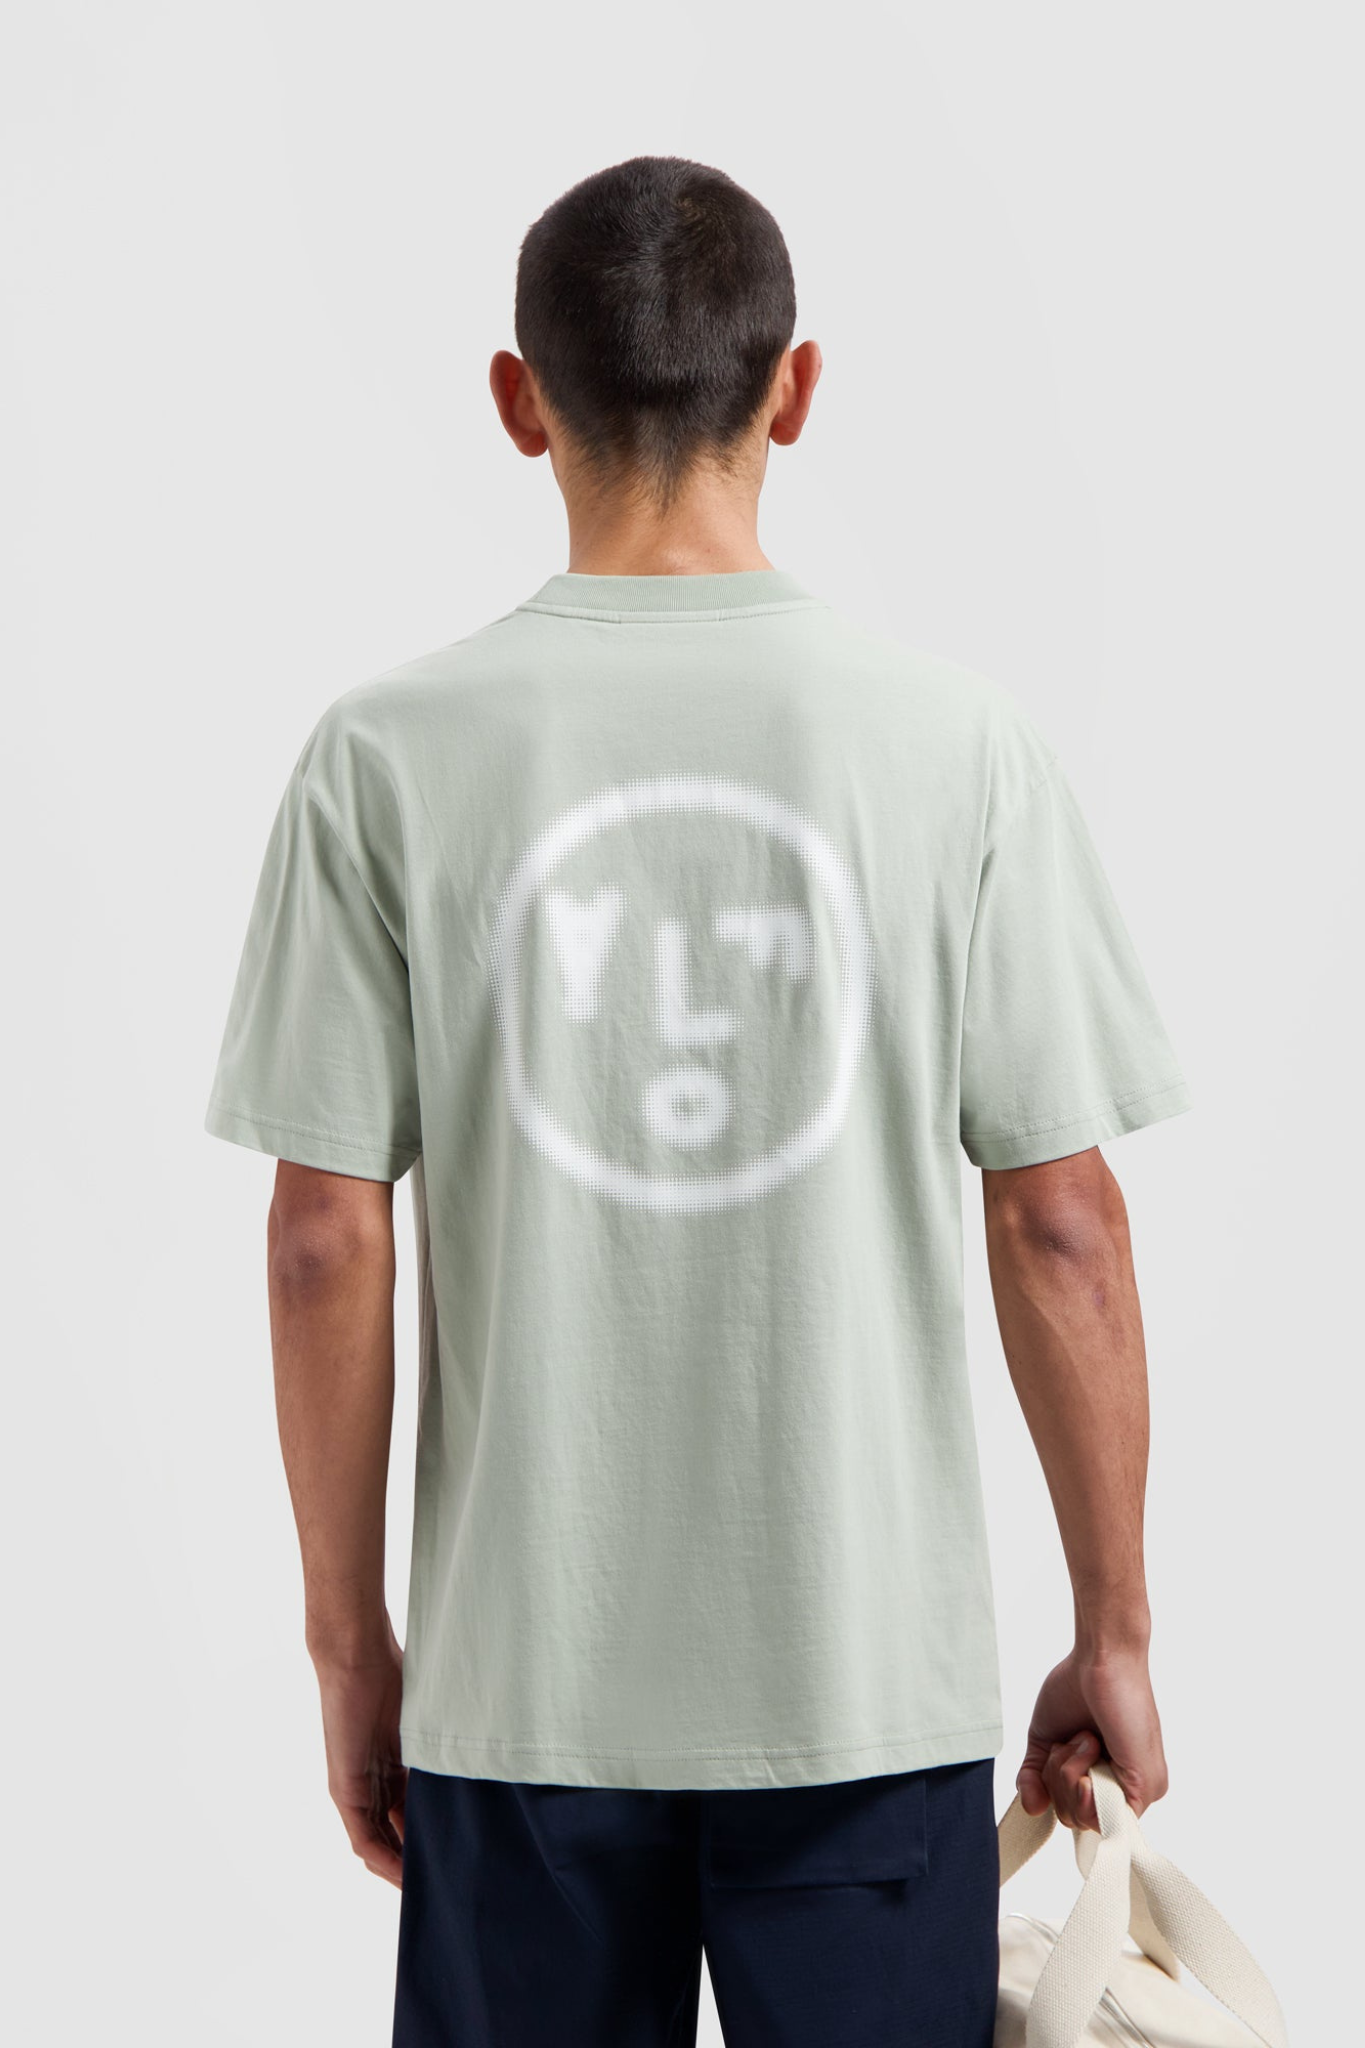 PIXELATED FACE TEE - PALE GREEN